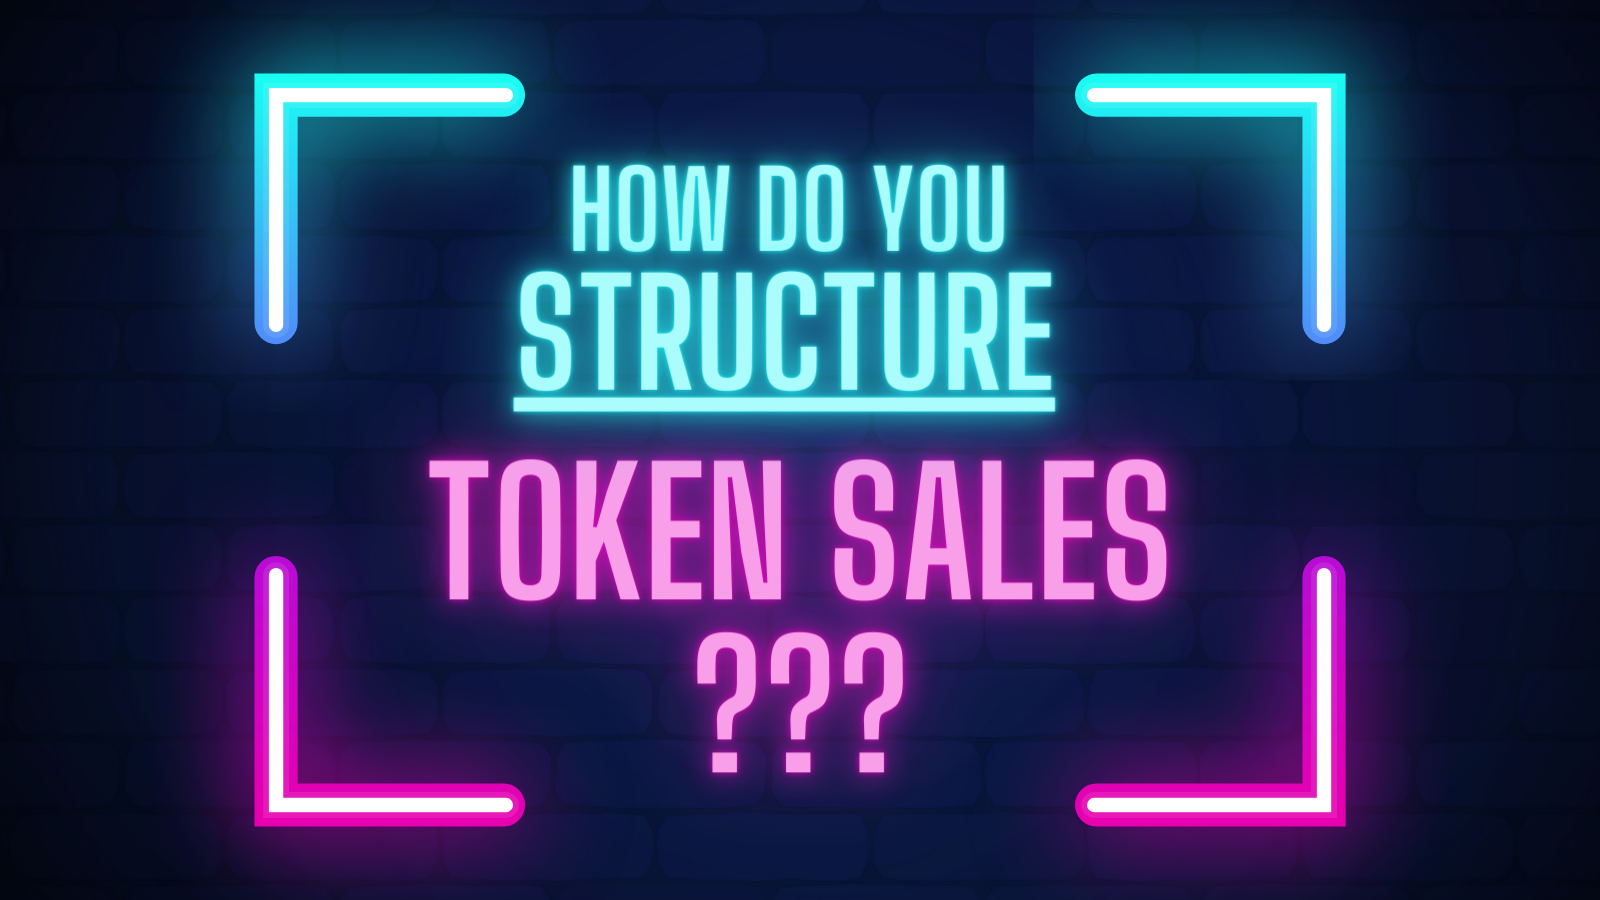 How do you structure a token sale?